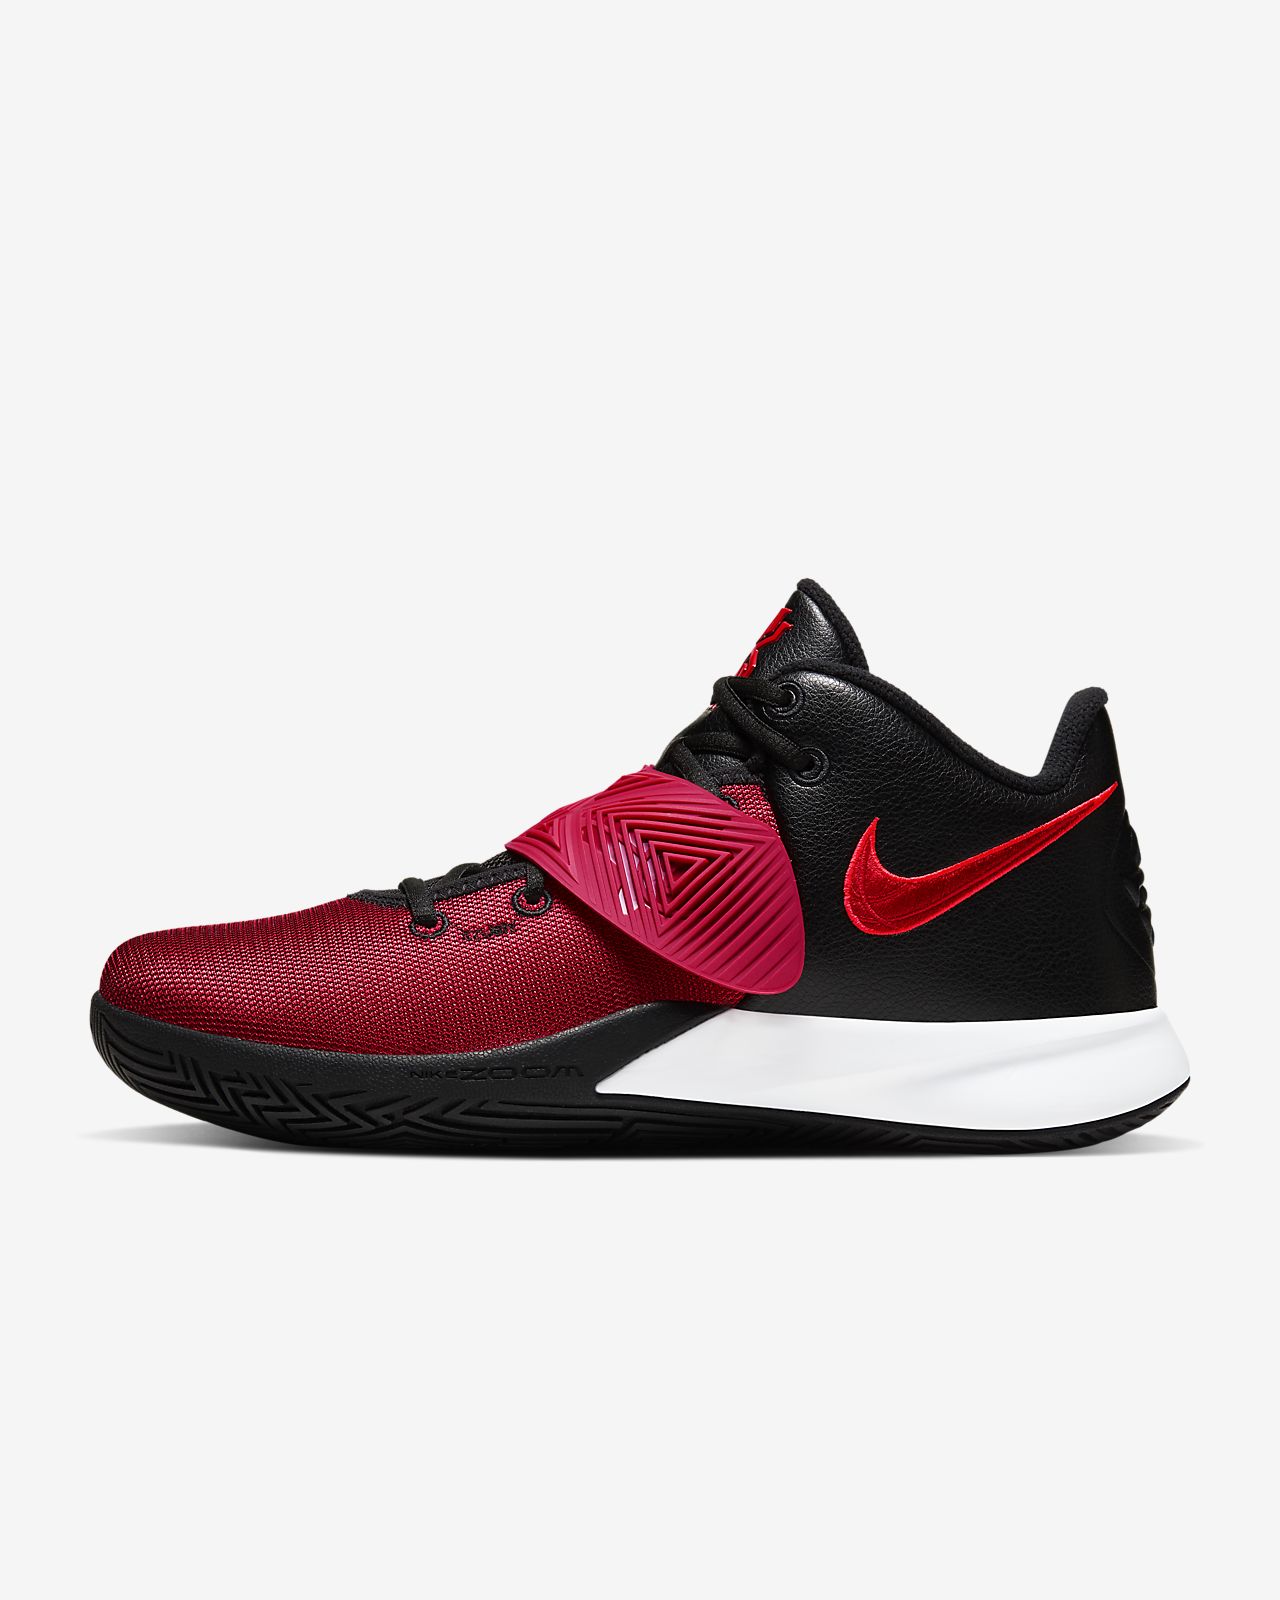 Kyrie Irving Shoes Flytrap 3 : Nike Kyrie Flytrap III EP 3 Irving South ...